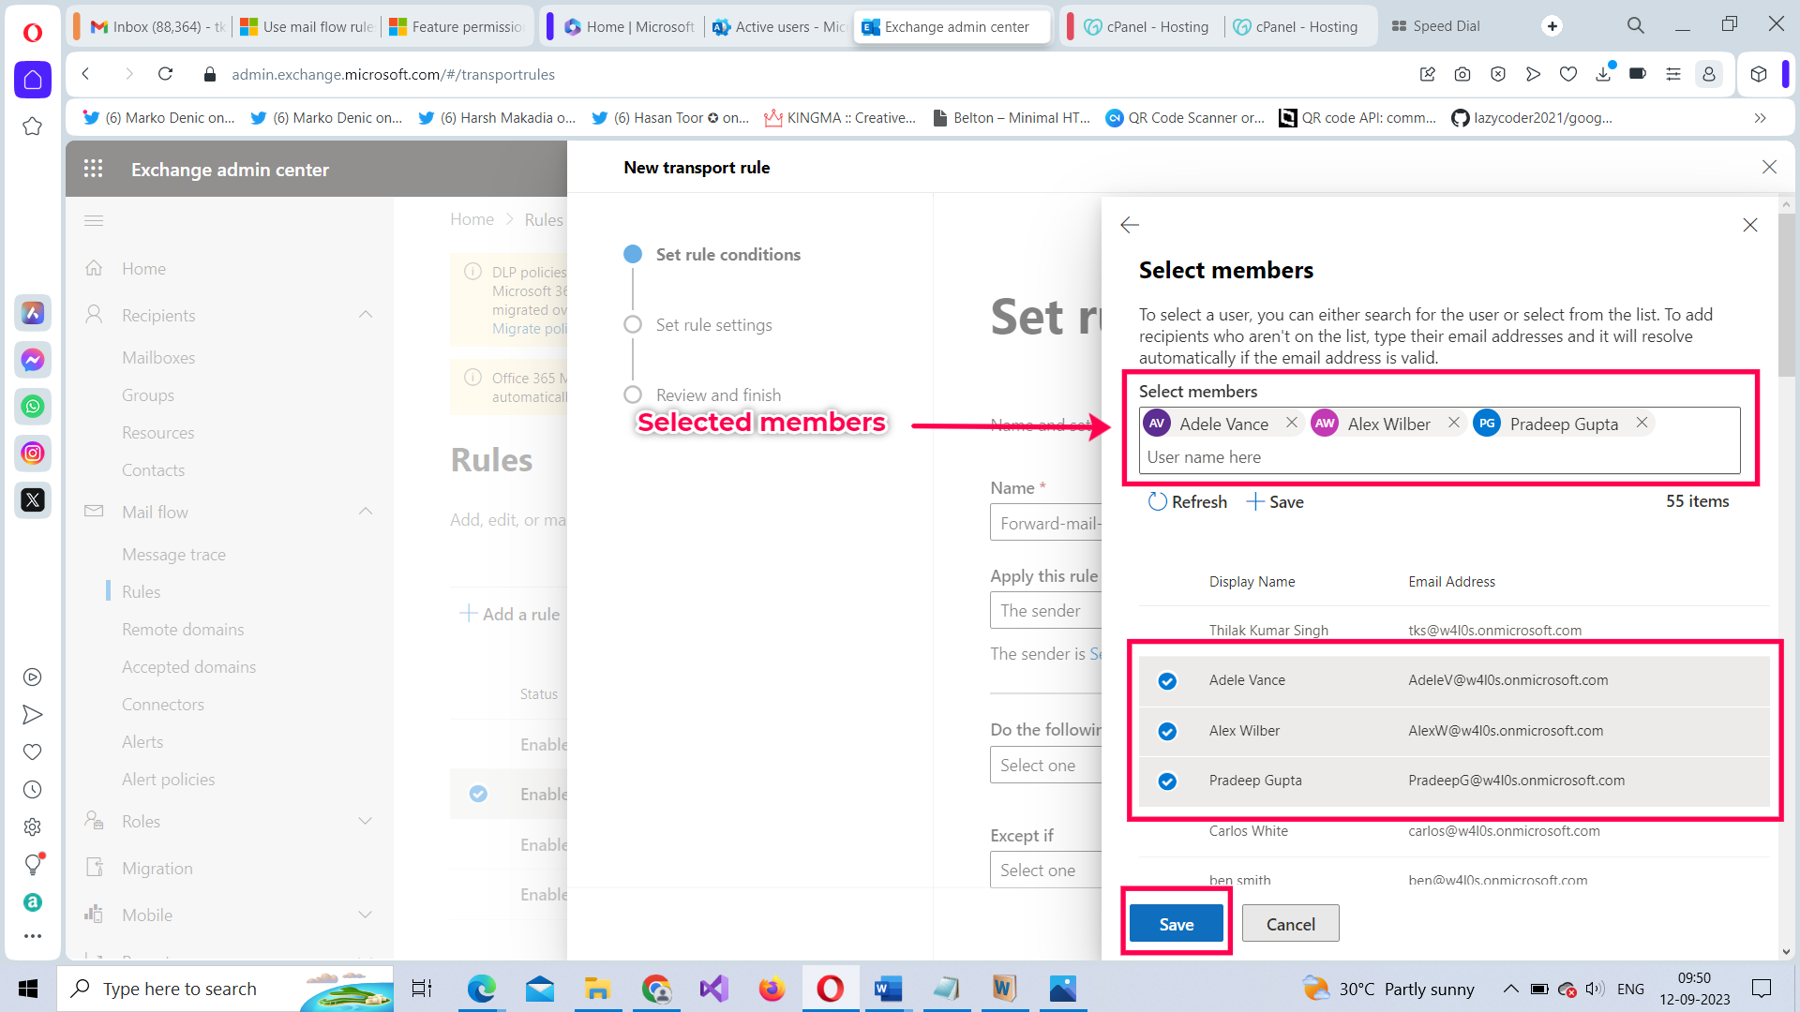 This screenshot shows how you can set the conditions for the Microsoft 365 mail flow rule in the Microsoft 365 Exchange admin center by searching or selecting a user from the list, adding a user, and then saving it.